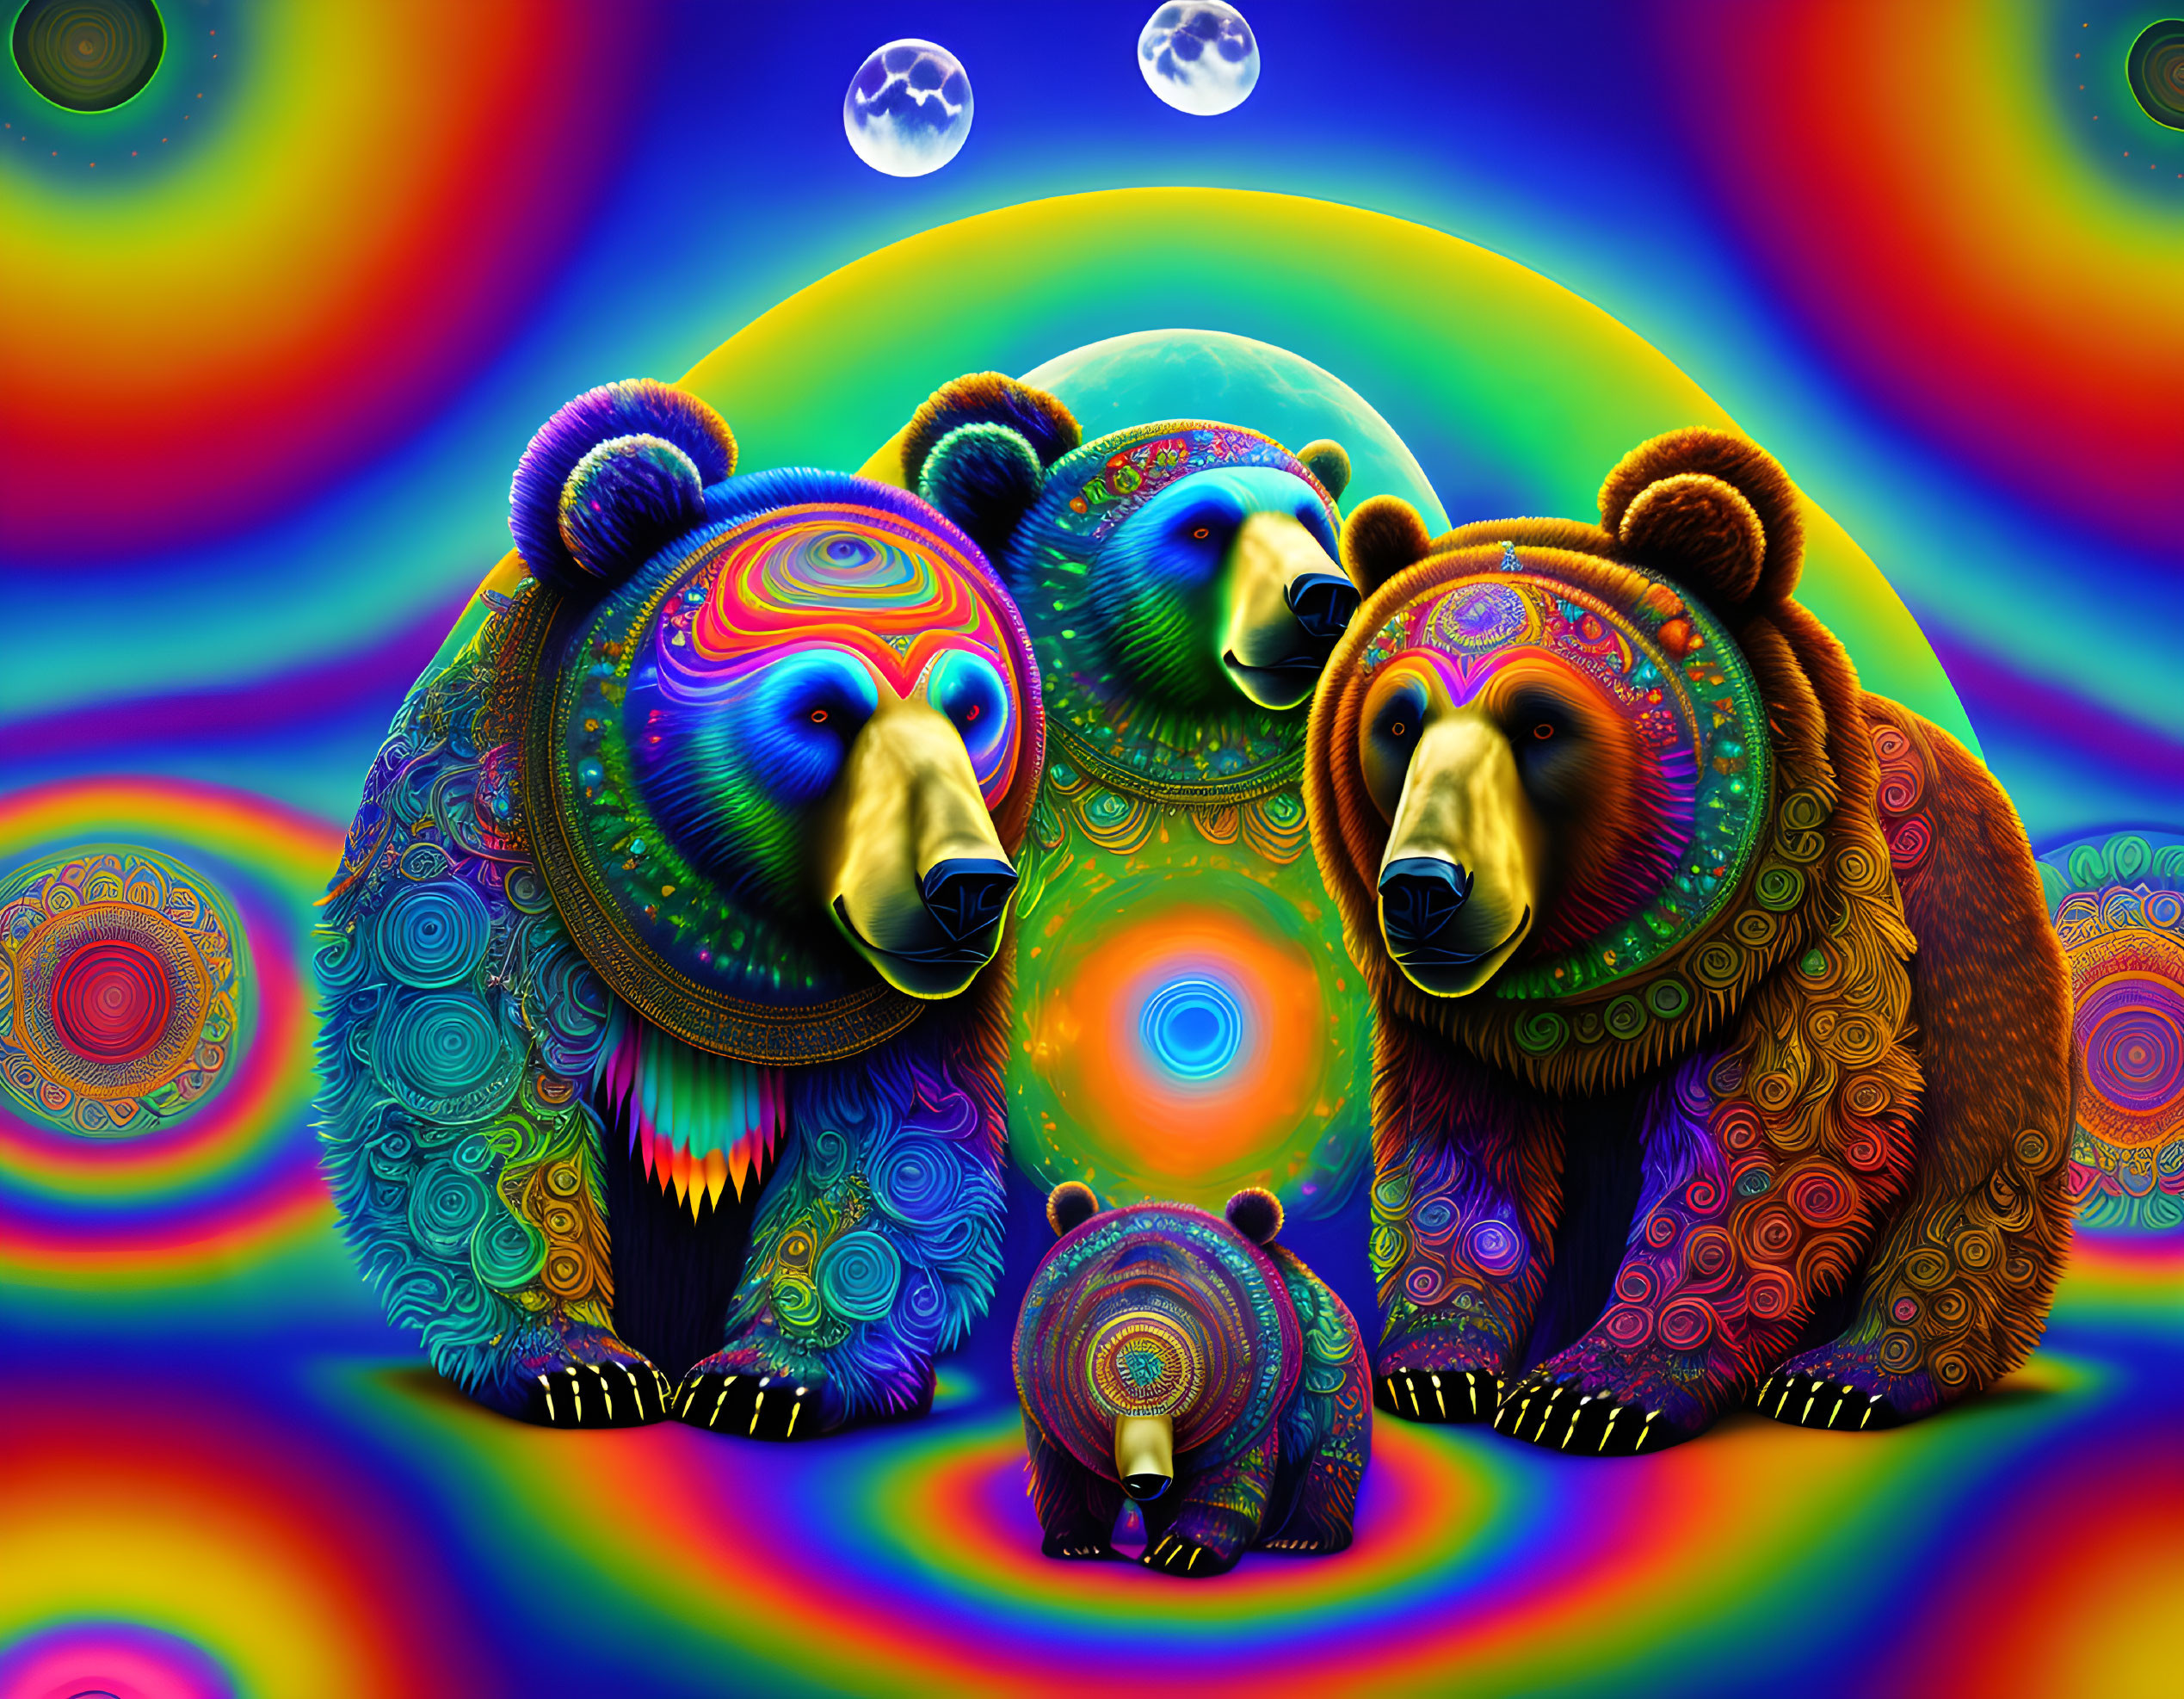 Colorful Psychedelic Image: Three Patterned Bears in Rainbow Swirls